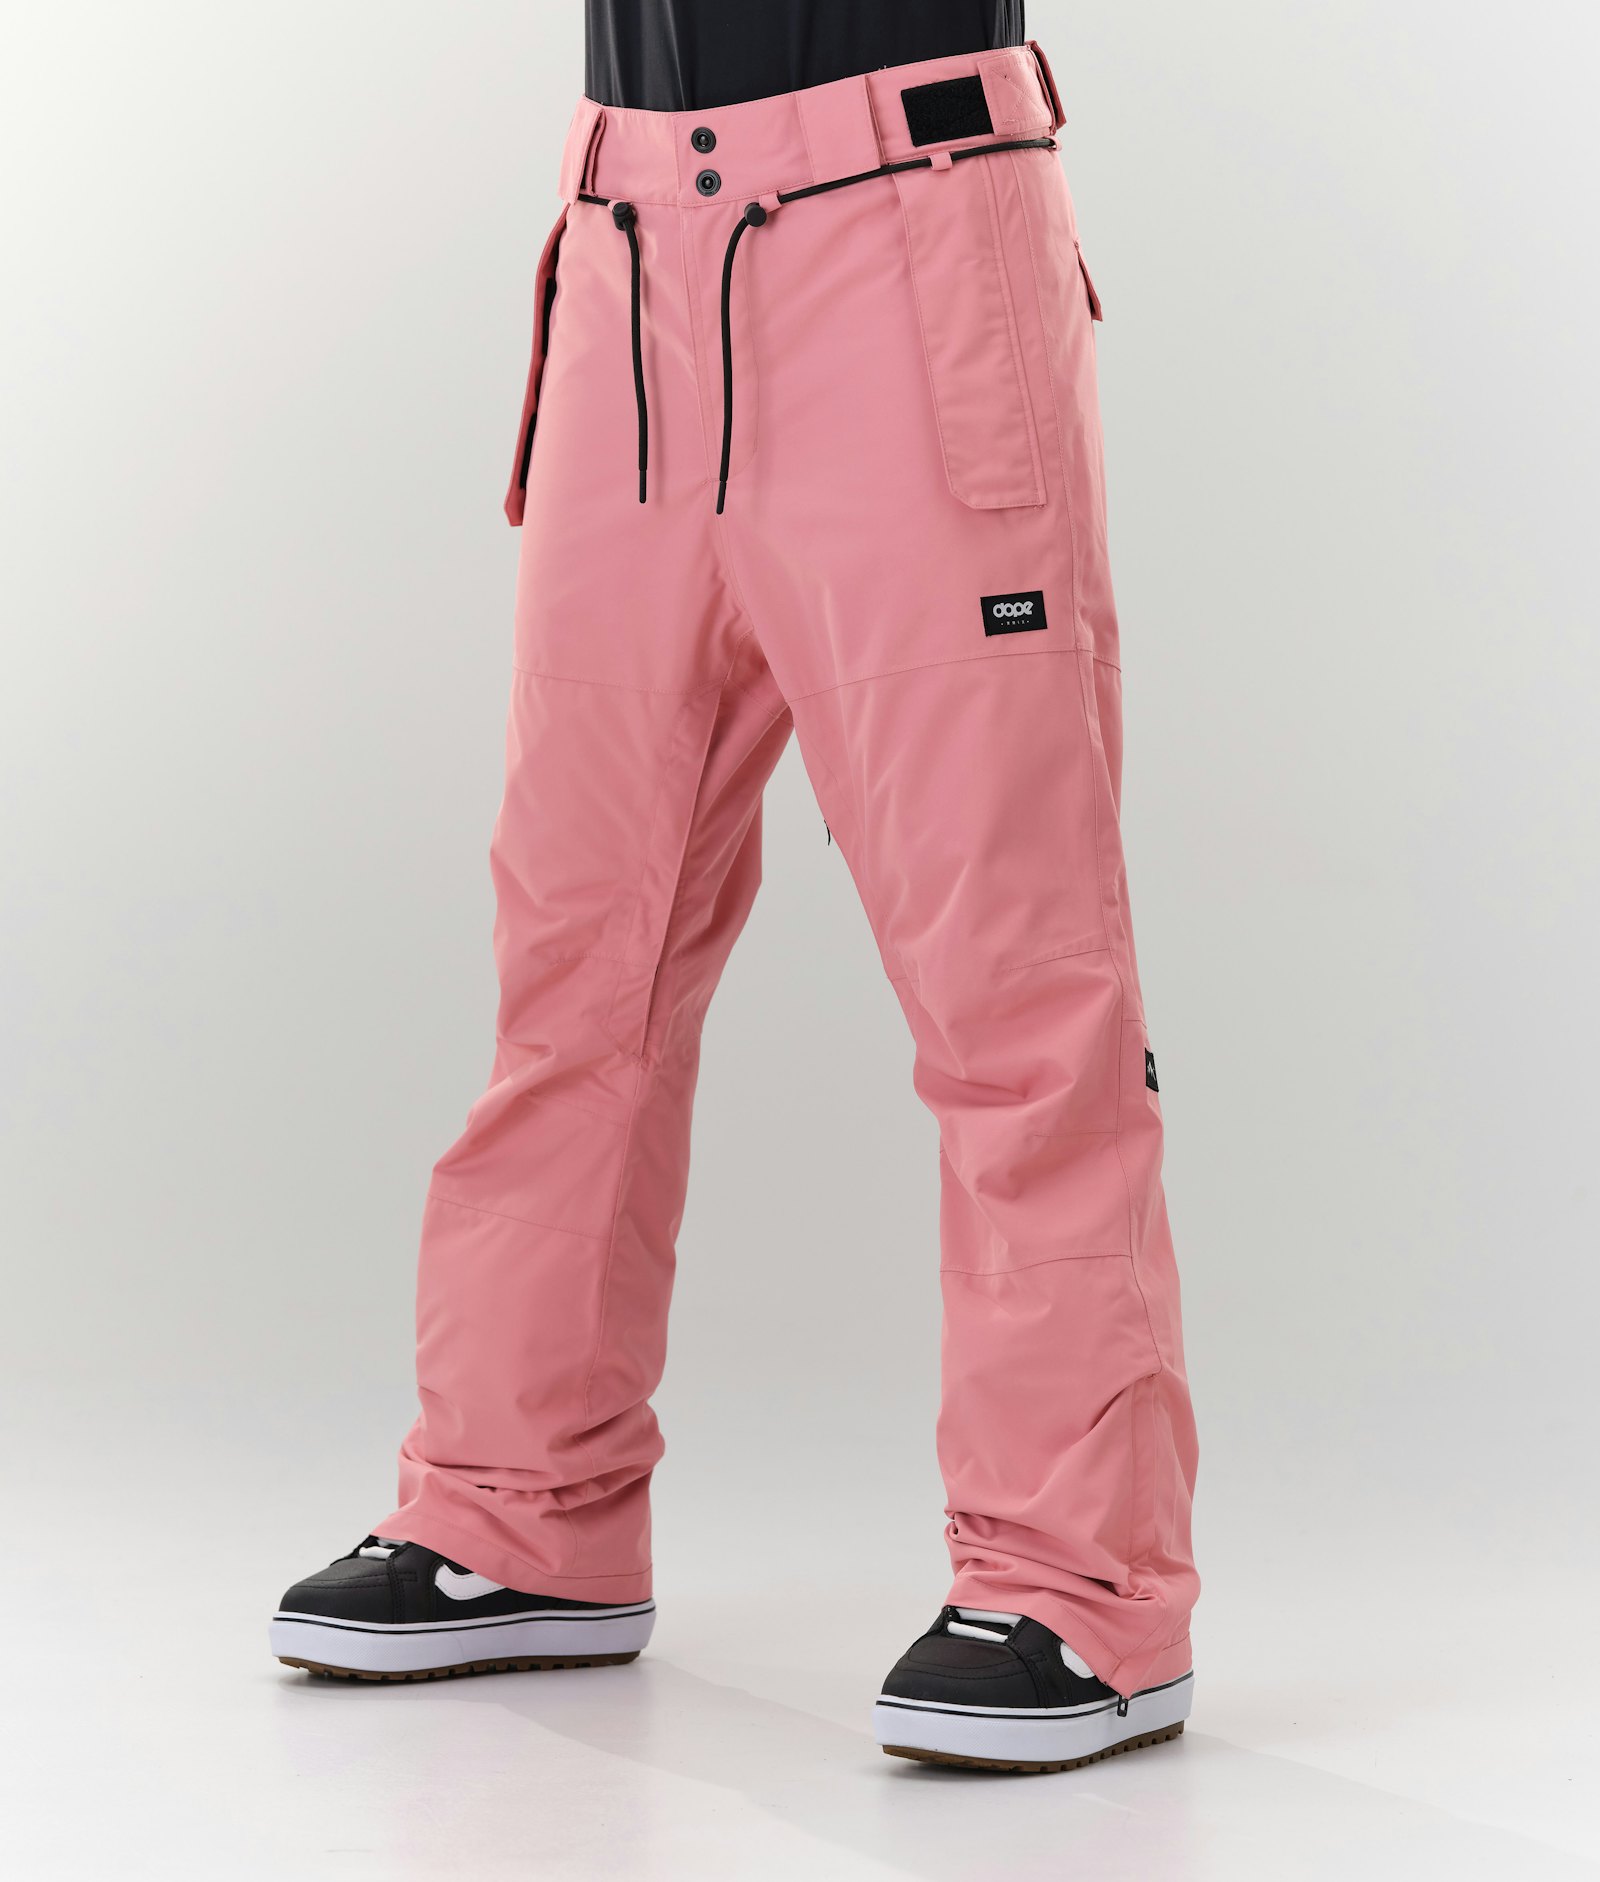 Iconic NP W Snowboard Pants Women Pink, Image 1 of 5